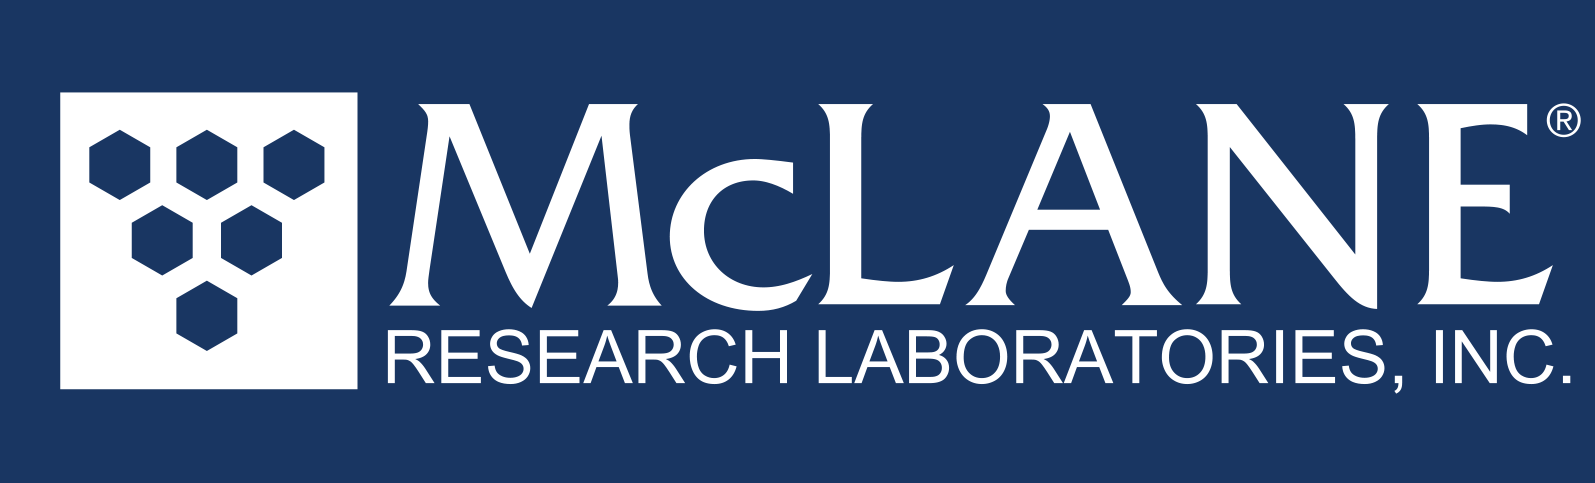 McLane-New White on Blue Logo (R) for Print.png